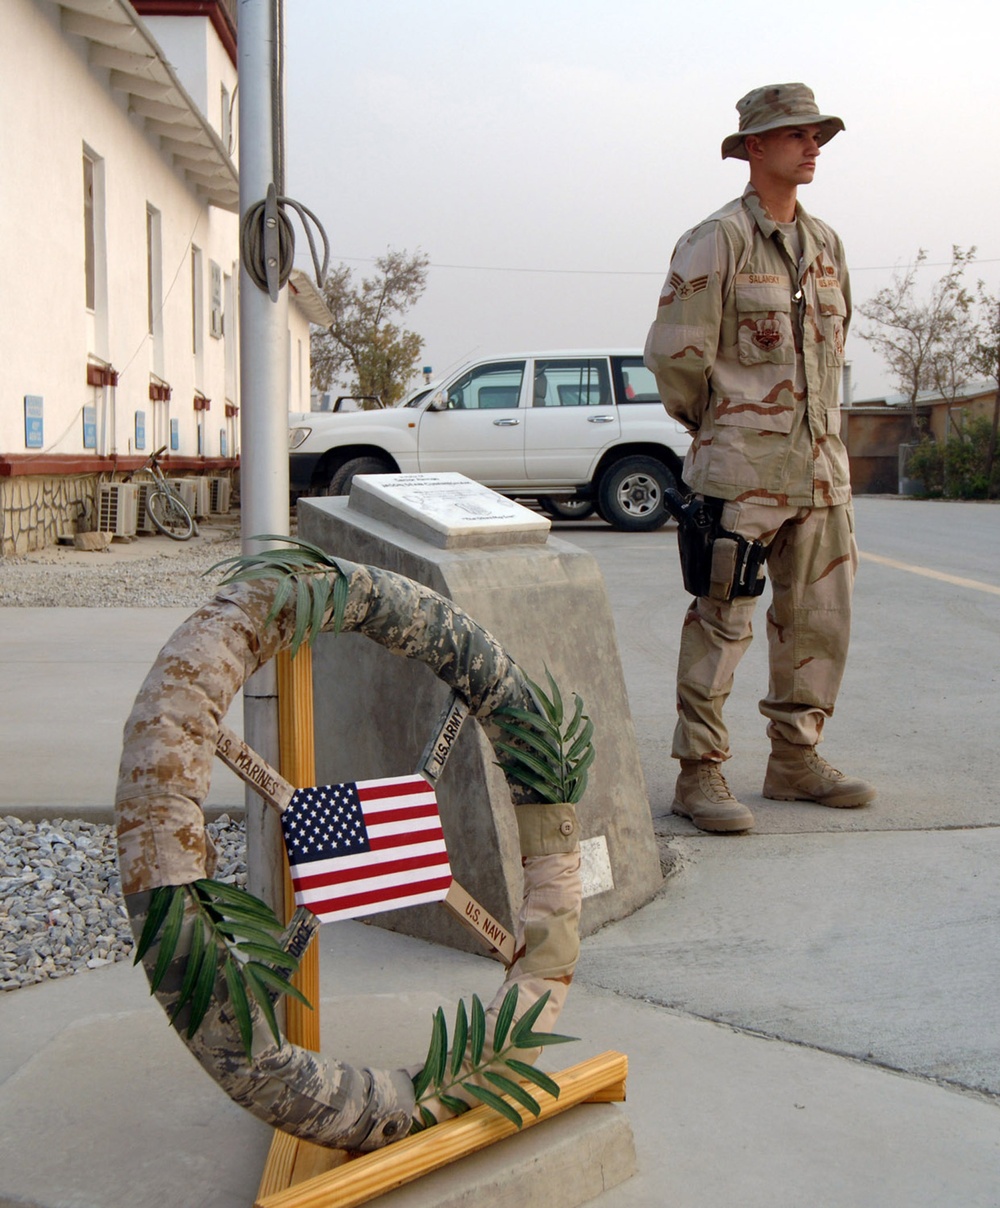 Senior Airman Michael Salansky of Uniondale, Pa., a member of the 455th Expeditionary Security Forces Squadron, stands a silent vigil in honor of Veterans Day, Nov. 11.